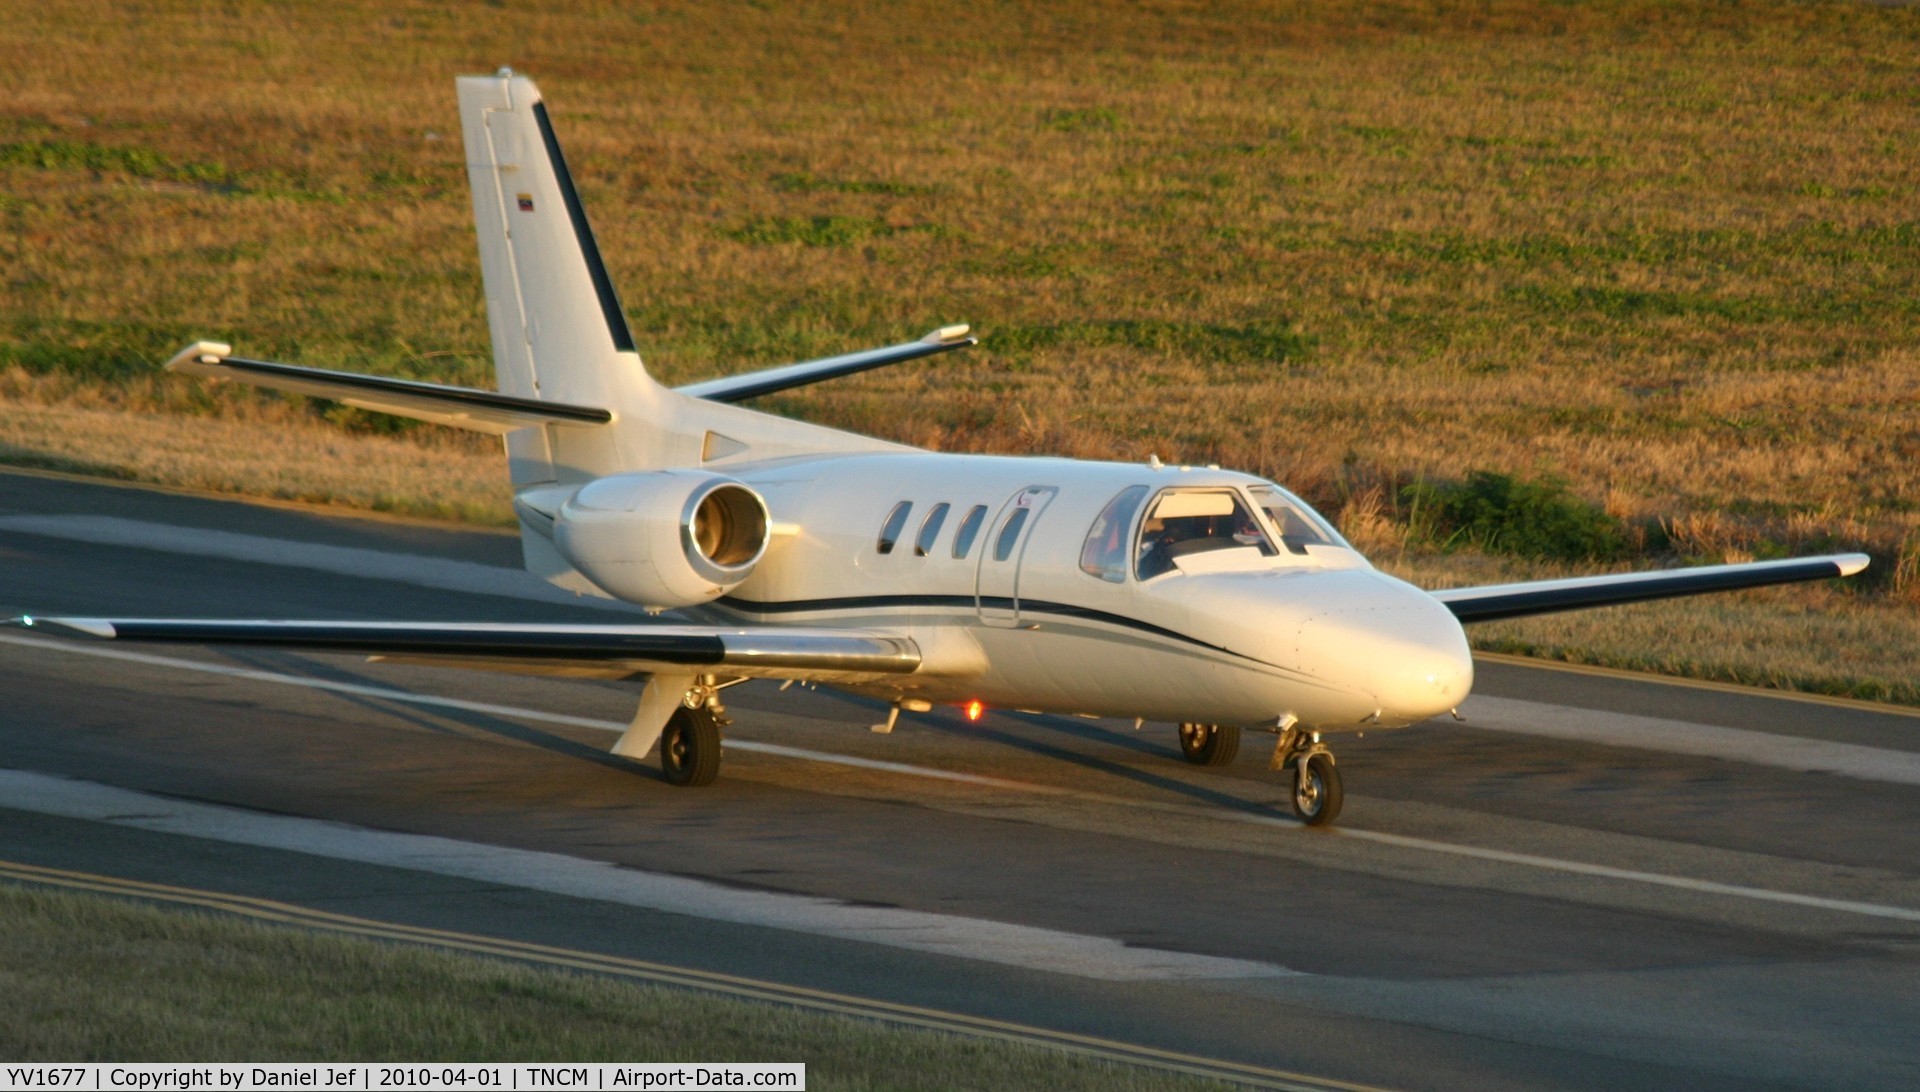 YV1677, 1973 Cessna 500 Citation I C/N 500-0109, YV1677 at the holding point Alpha for take off TNCM runway 10